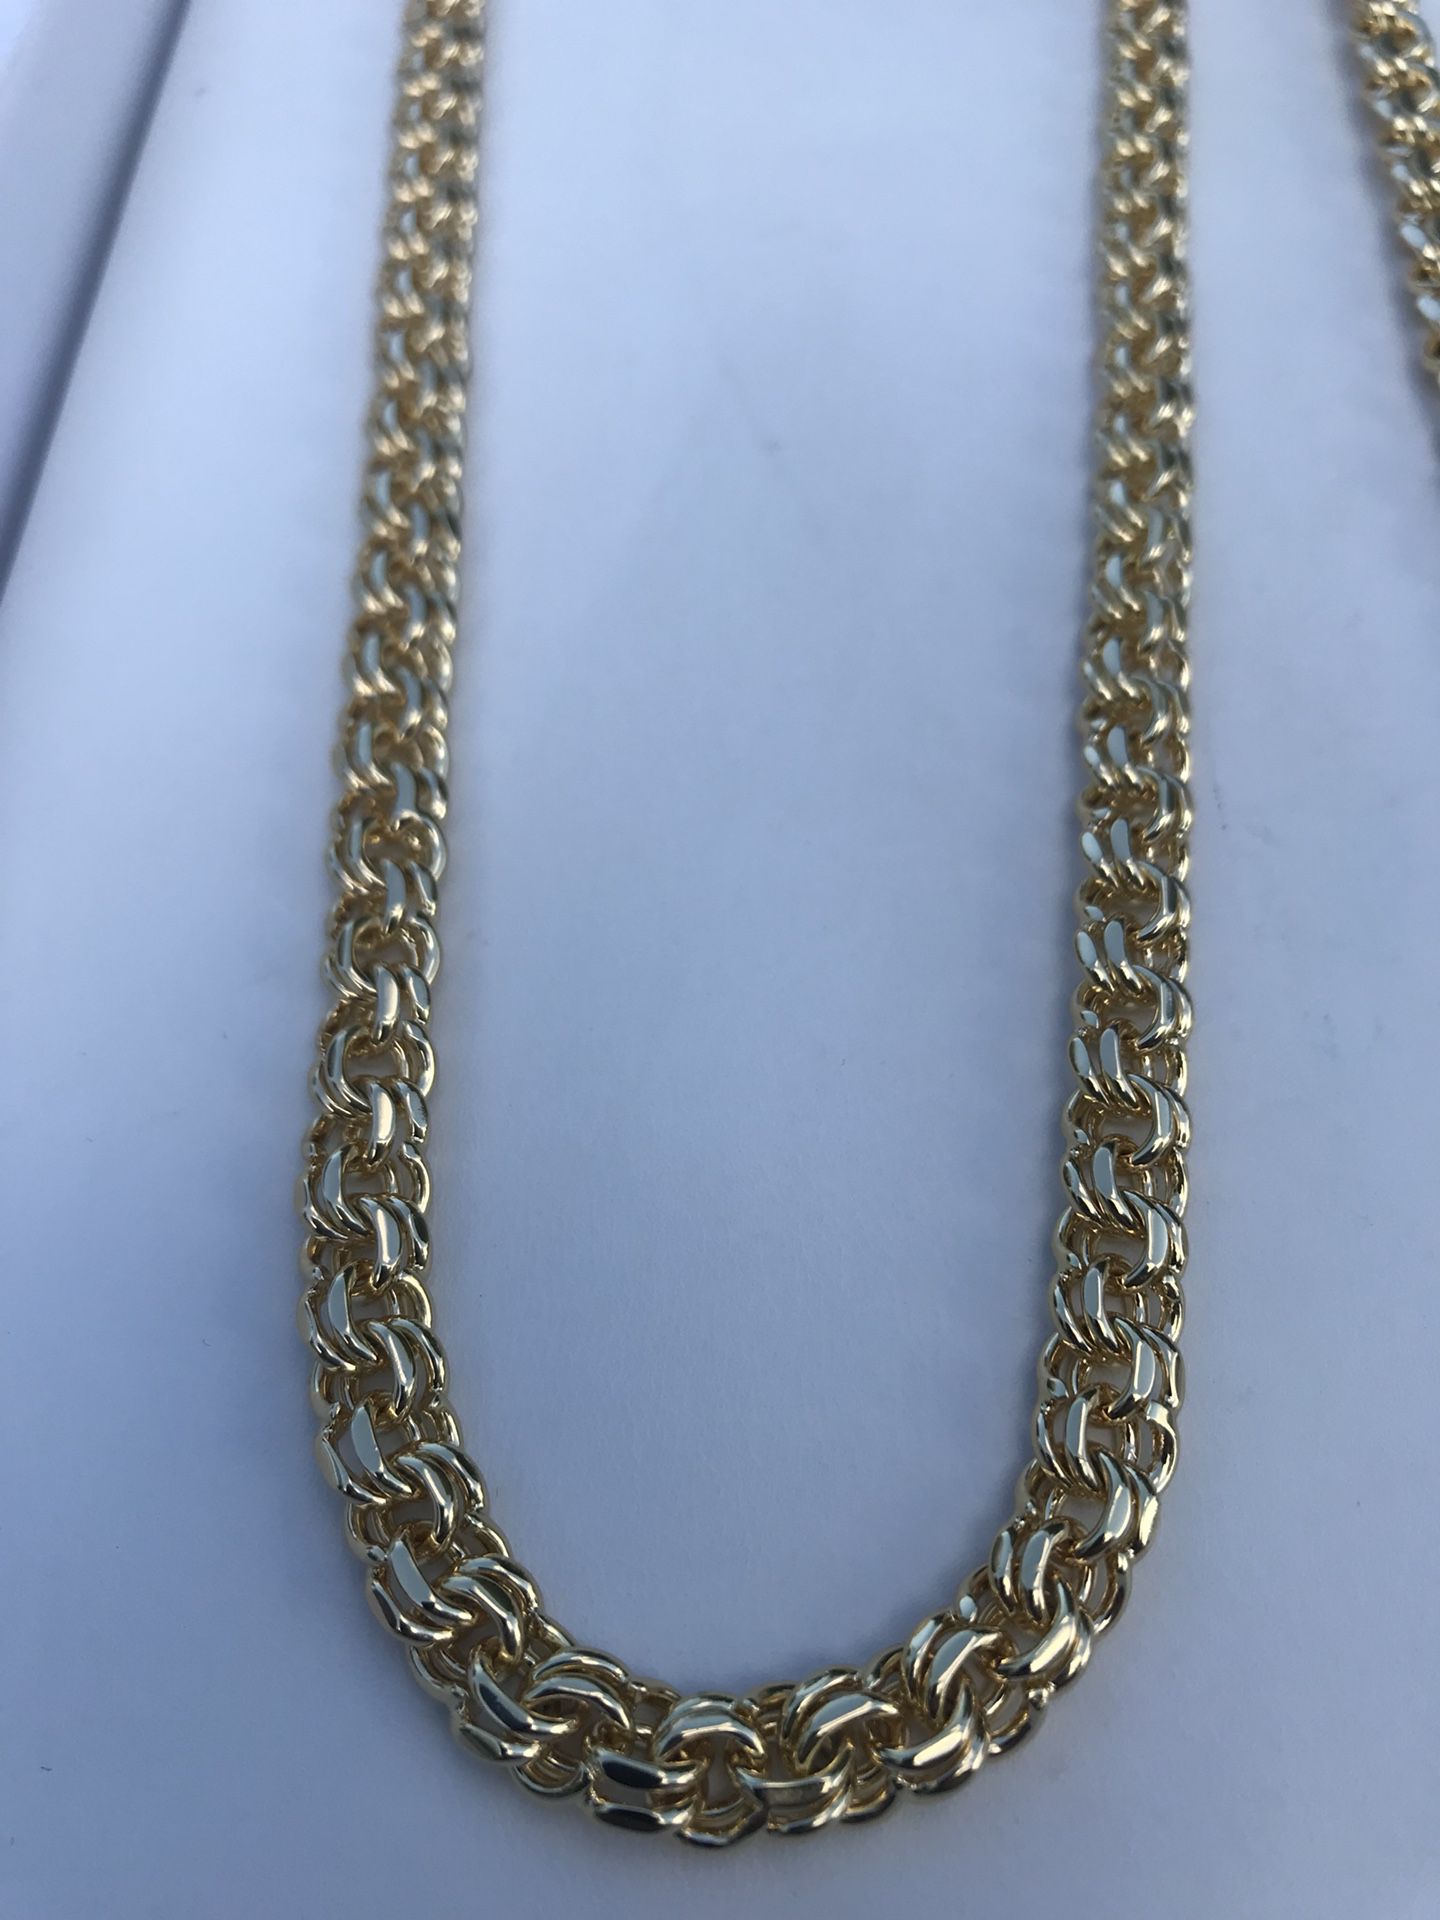 Louis Vuitton Chain Link Patches Necklace! for Sale in Conroe, TX - OfferUp